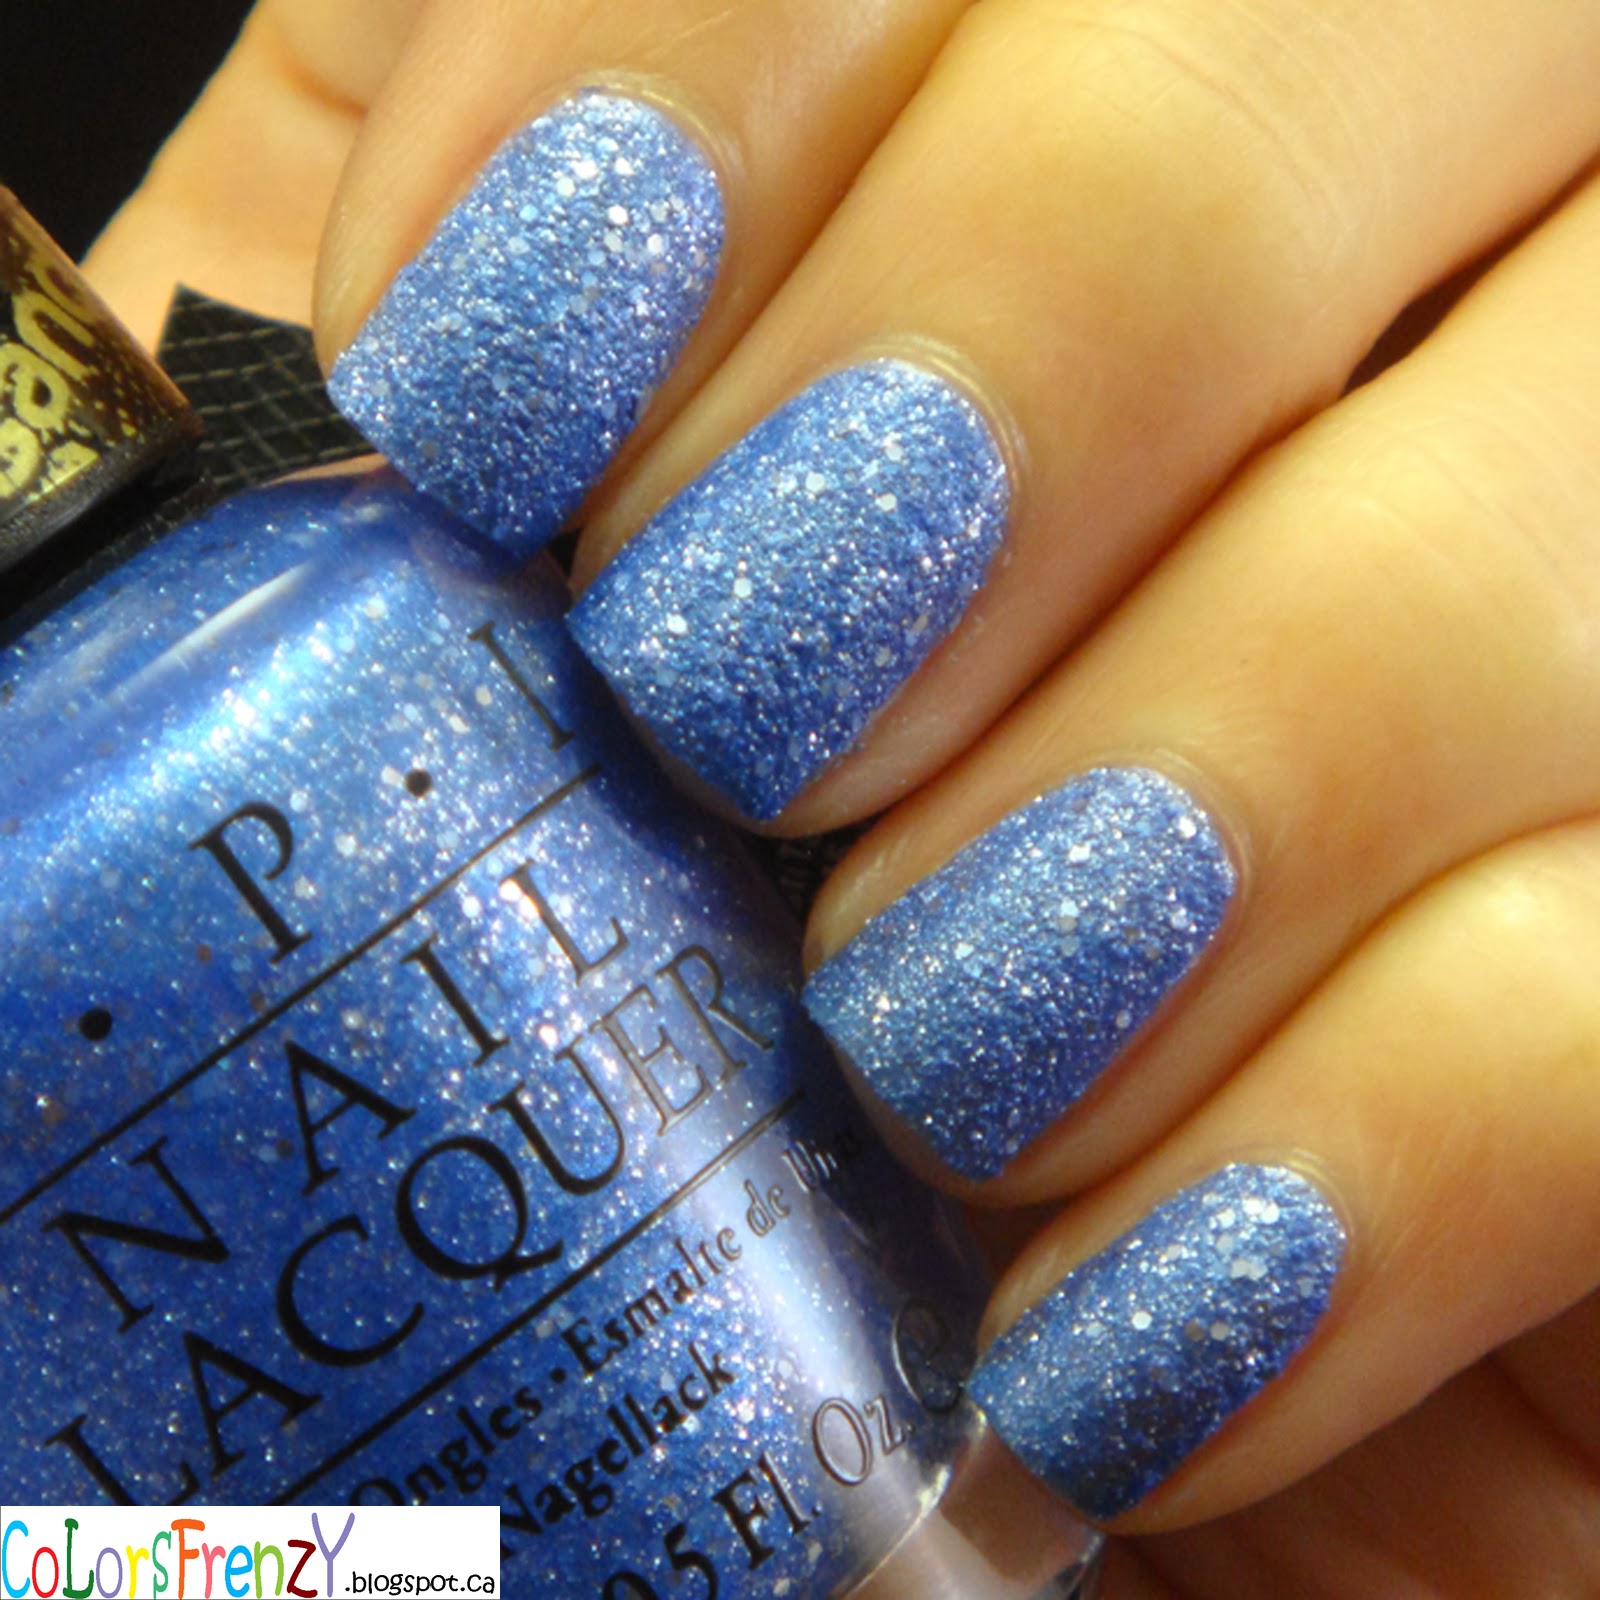 Colors Frenzy: My Picks of OPI Mariah Carey Holiday 2013 Collection